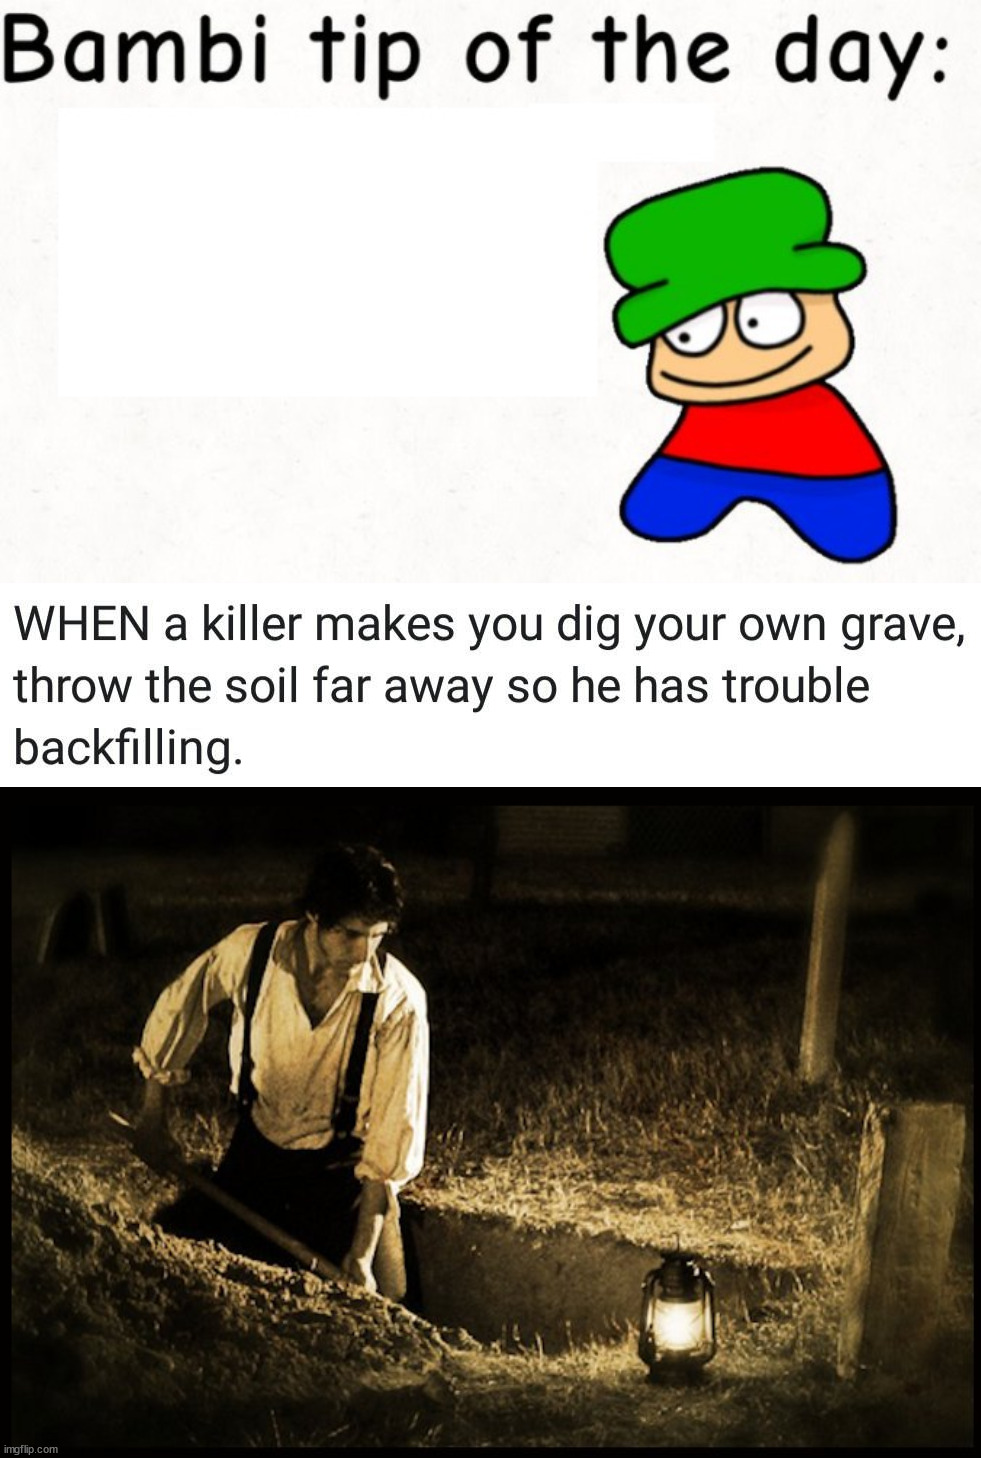 Make it hard for your killer | image tagged in bambi tip of the day,grave digger,killer,hard to swallow pills,difficult | made w/ Imgflip meme maker